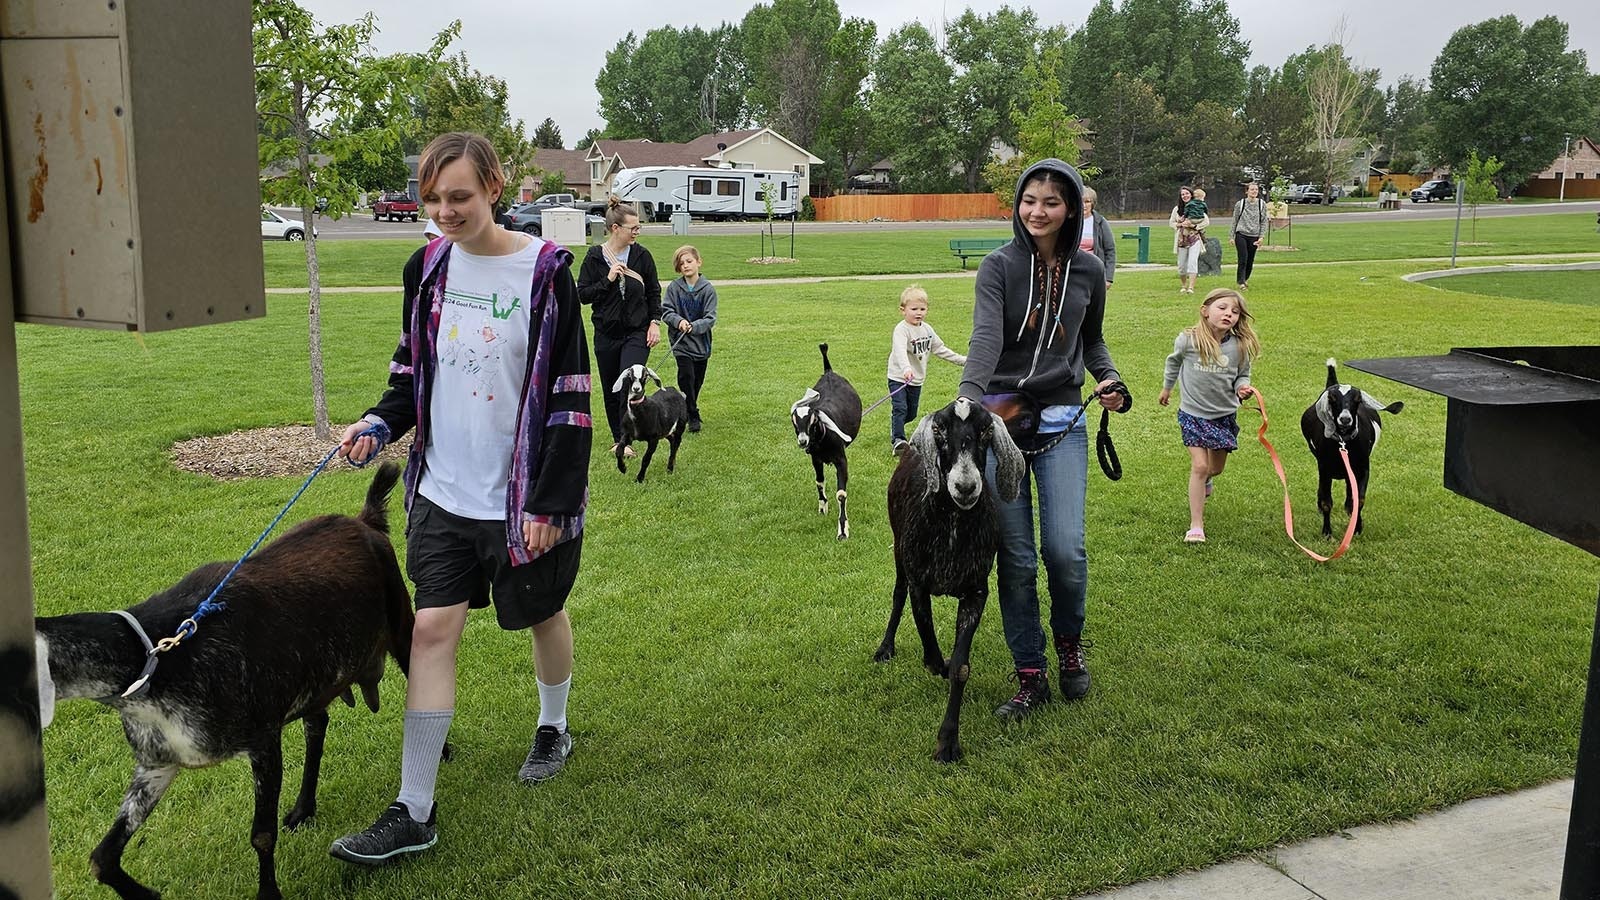 You can walk goats on a leash, just like you might a pet dog. And goats actually make great pets.